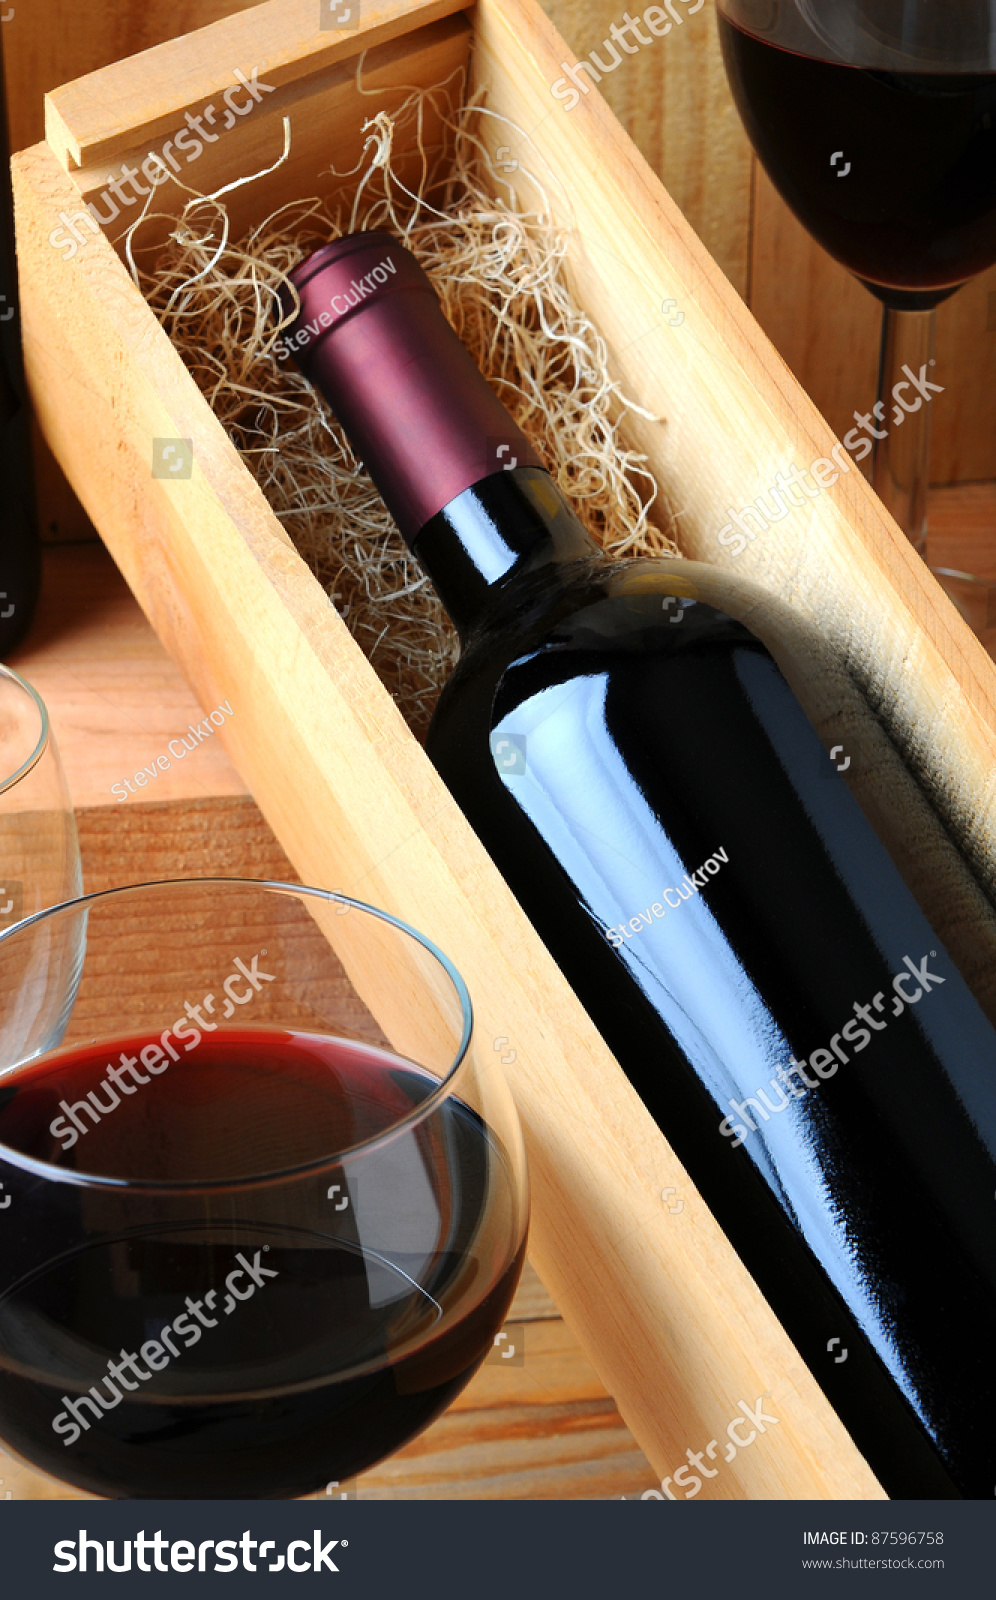 stock-photo-a-red-wine-bottle-in-a-woode